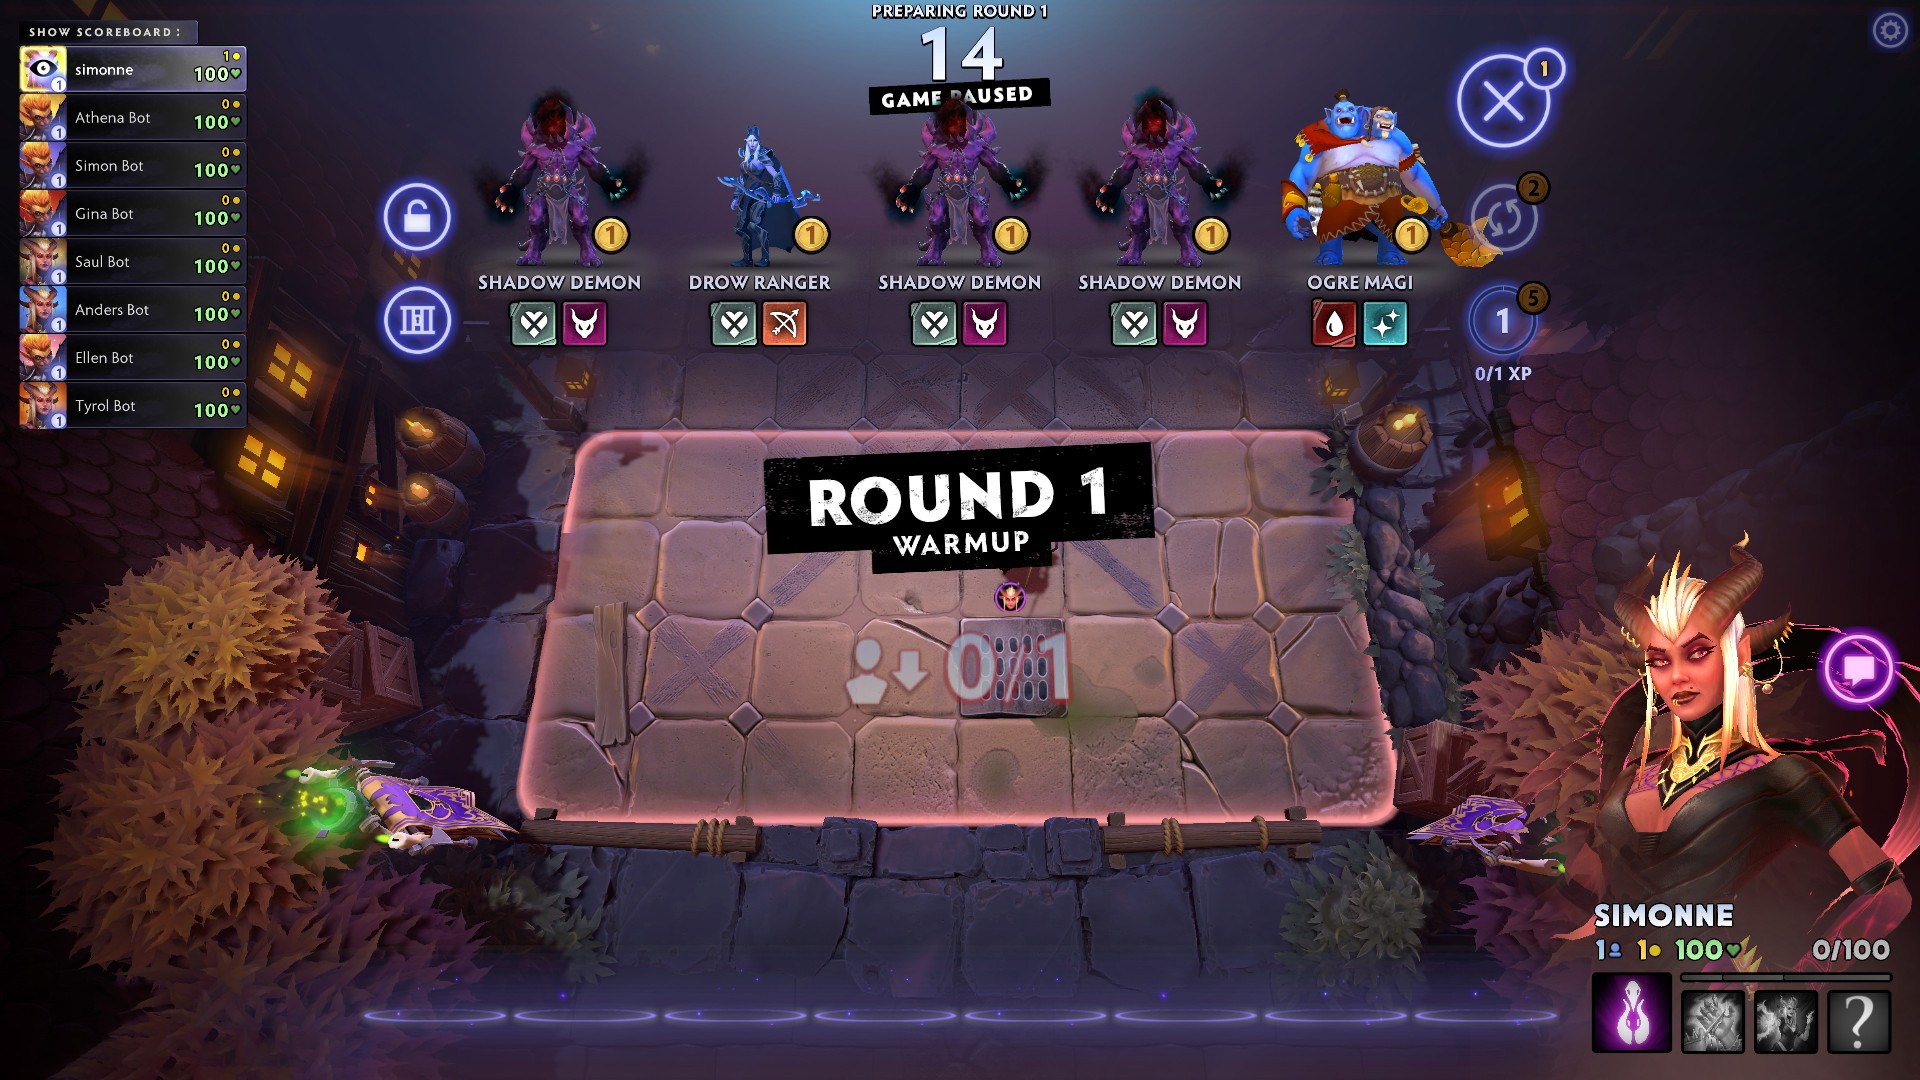 The first round of one of the best laptop games, Dota Underlords